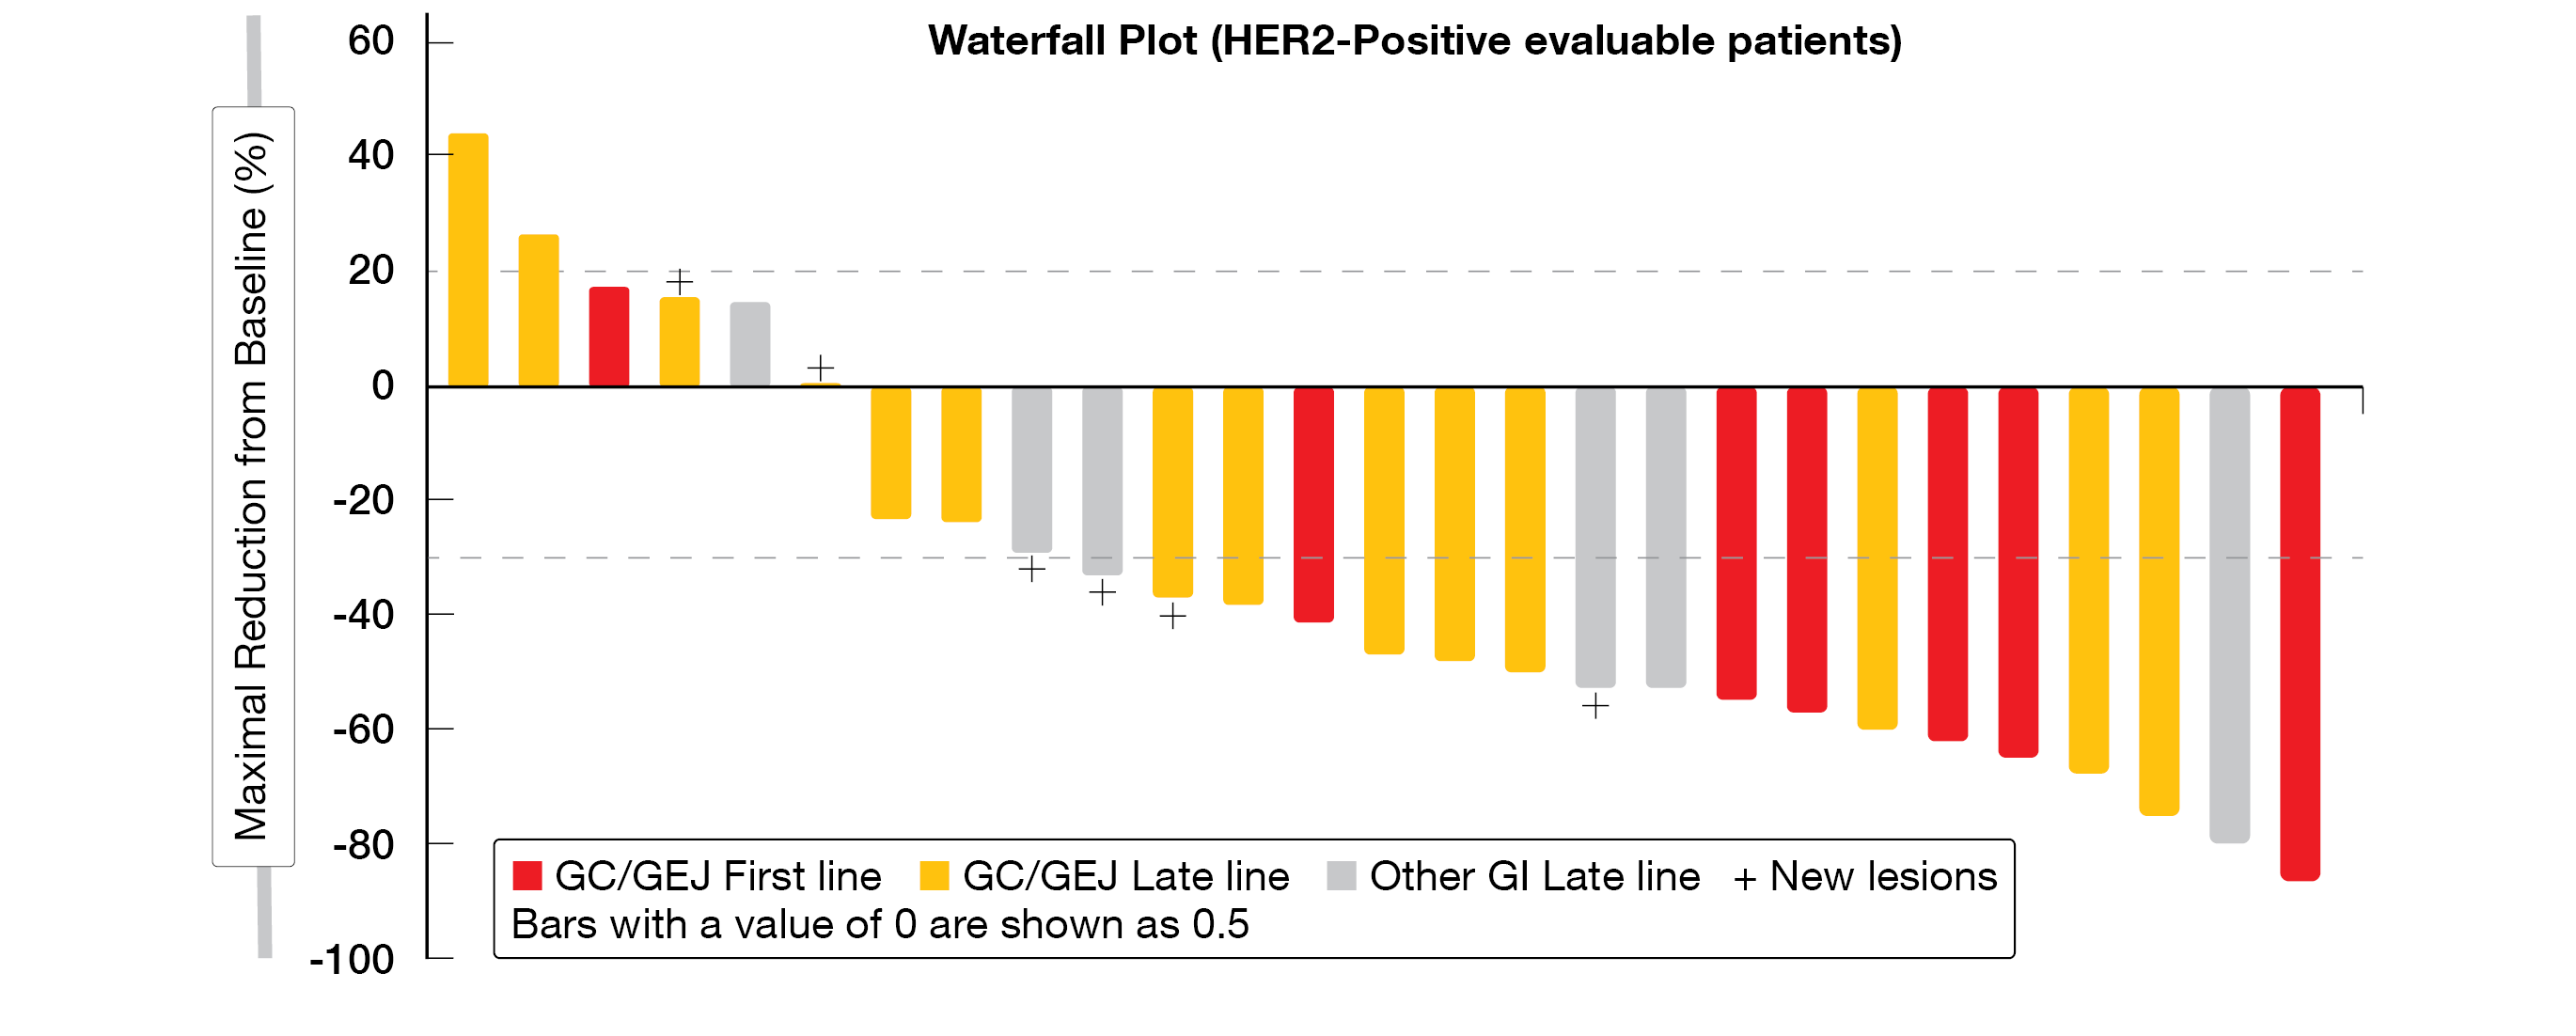 Figure 6: Waterfall plot of HER2-positive patients with GI tumors treated in first or later lines.